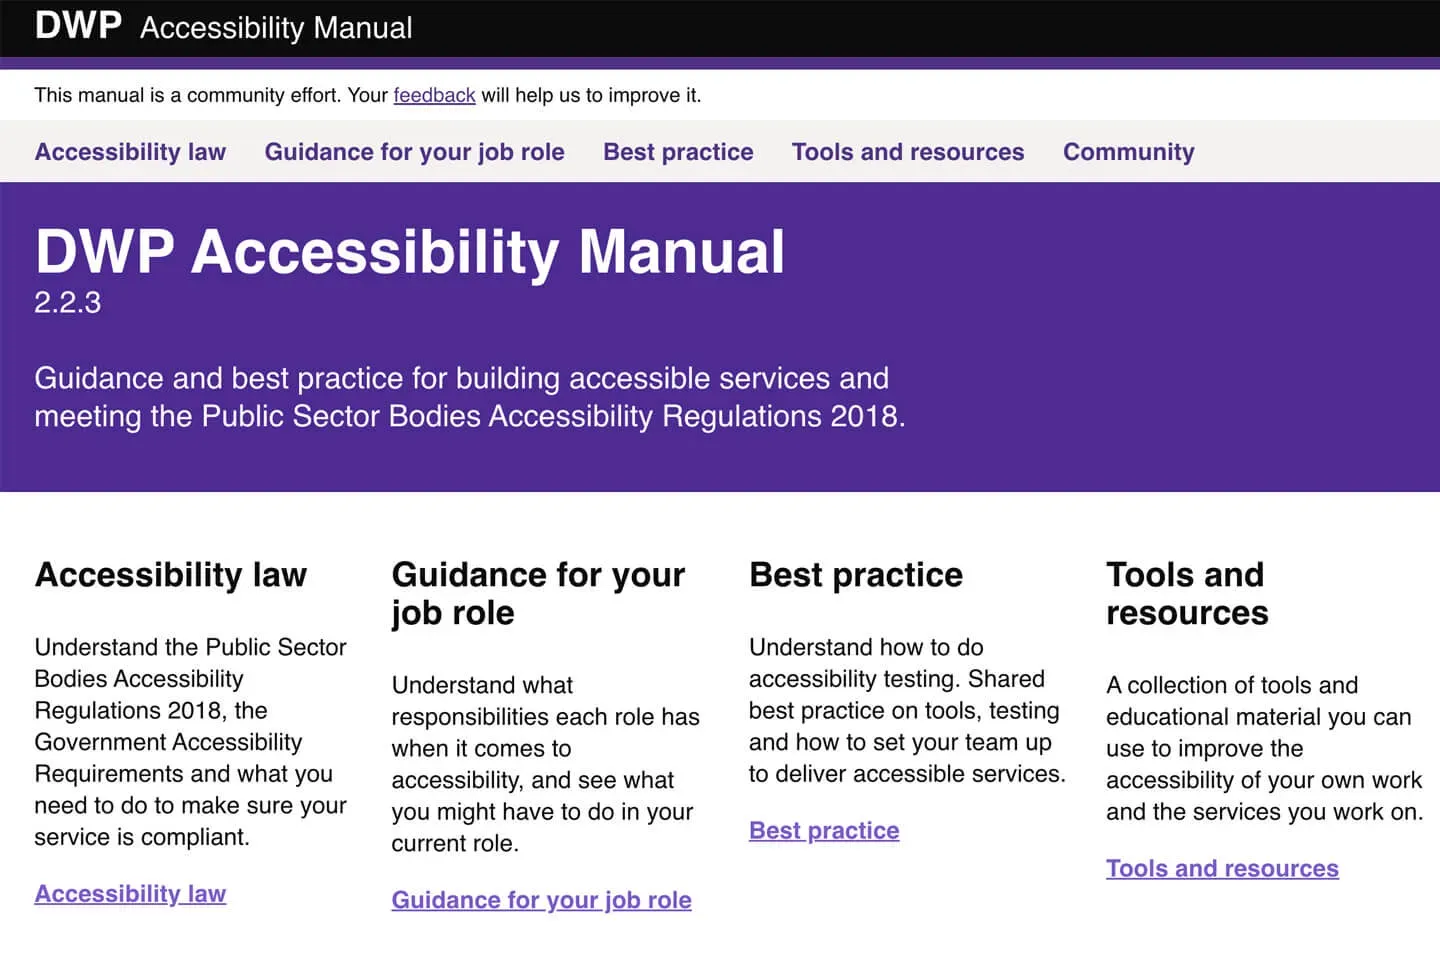 The homepage of the DWP Accessibility Manual.